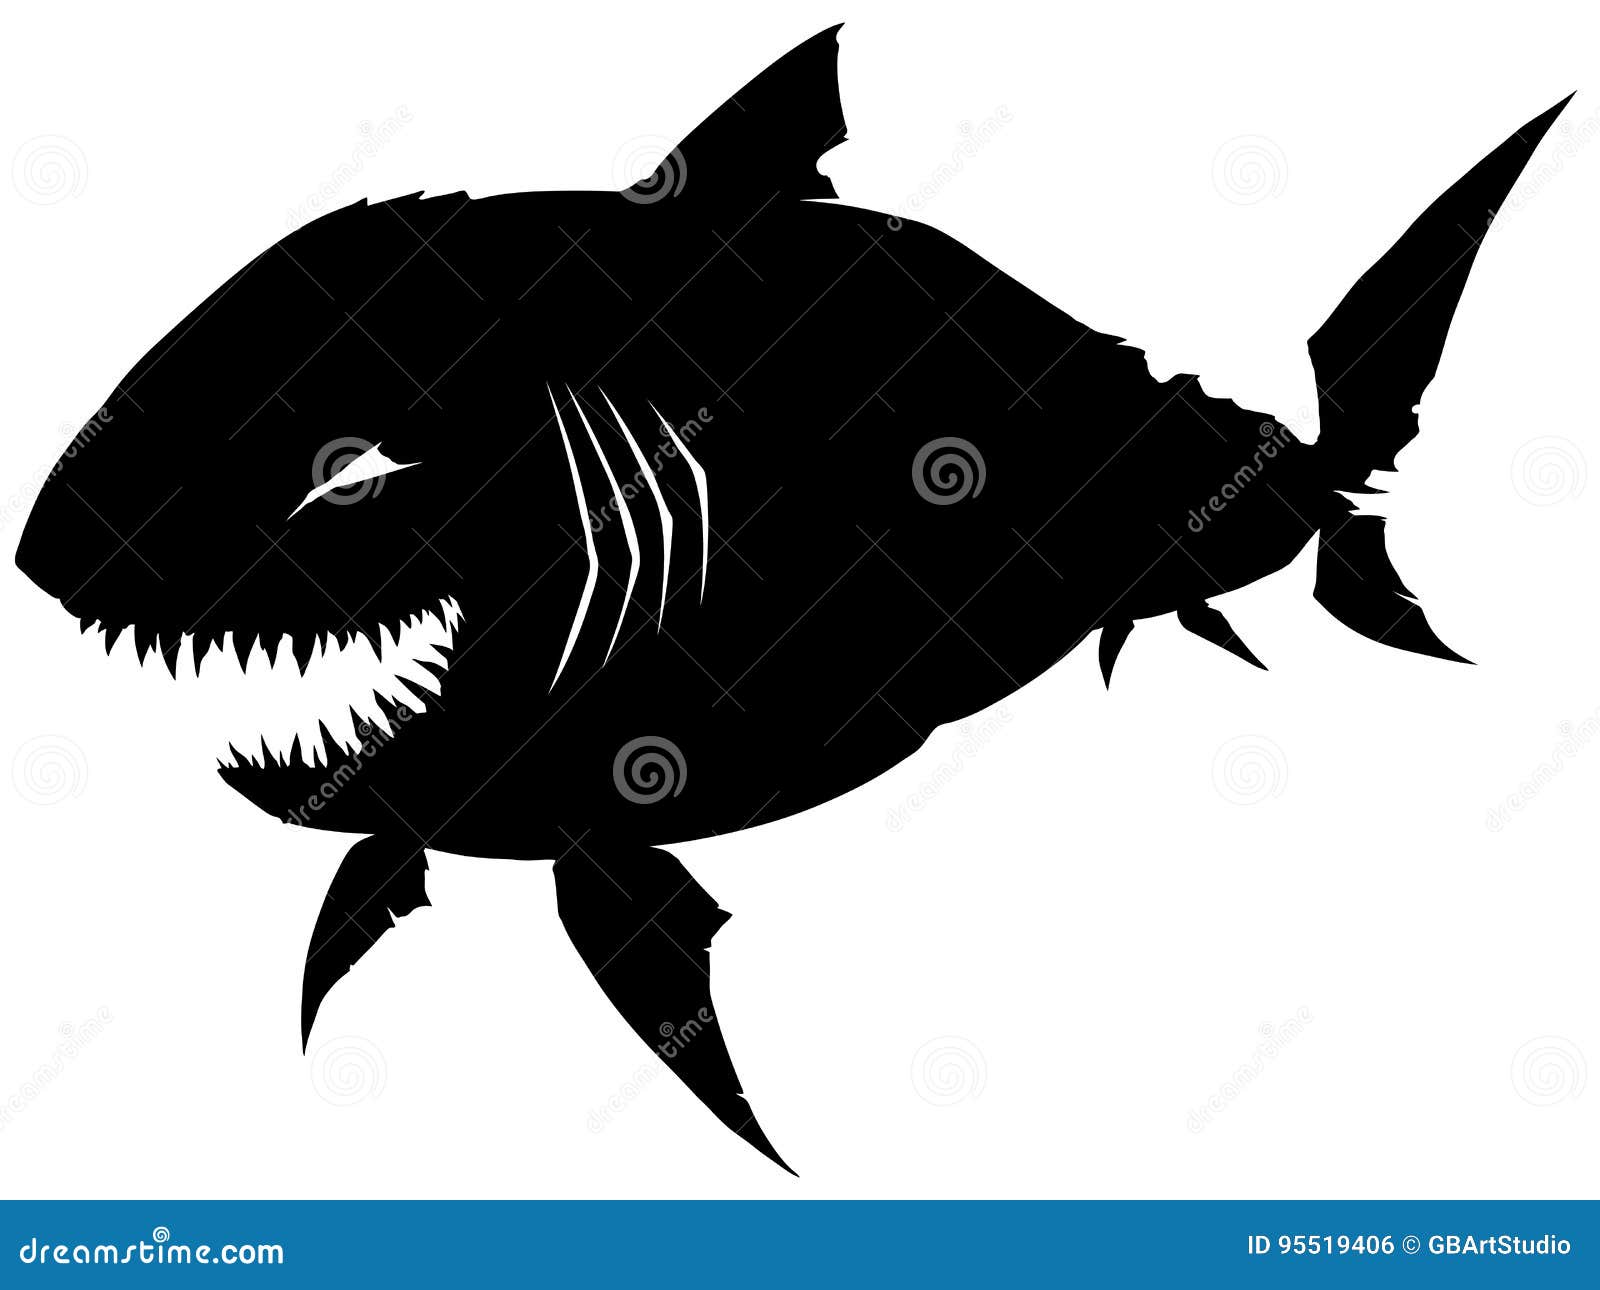 Download Black Graphic Silhouette Shark With Sharp Teeth Stock ...